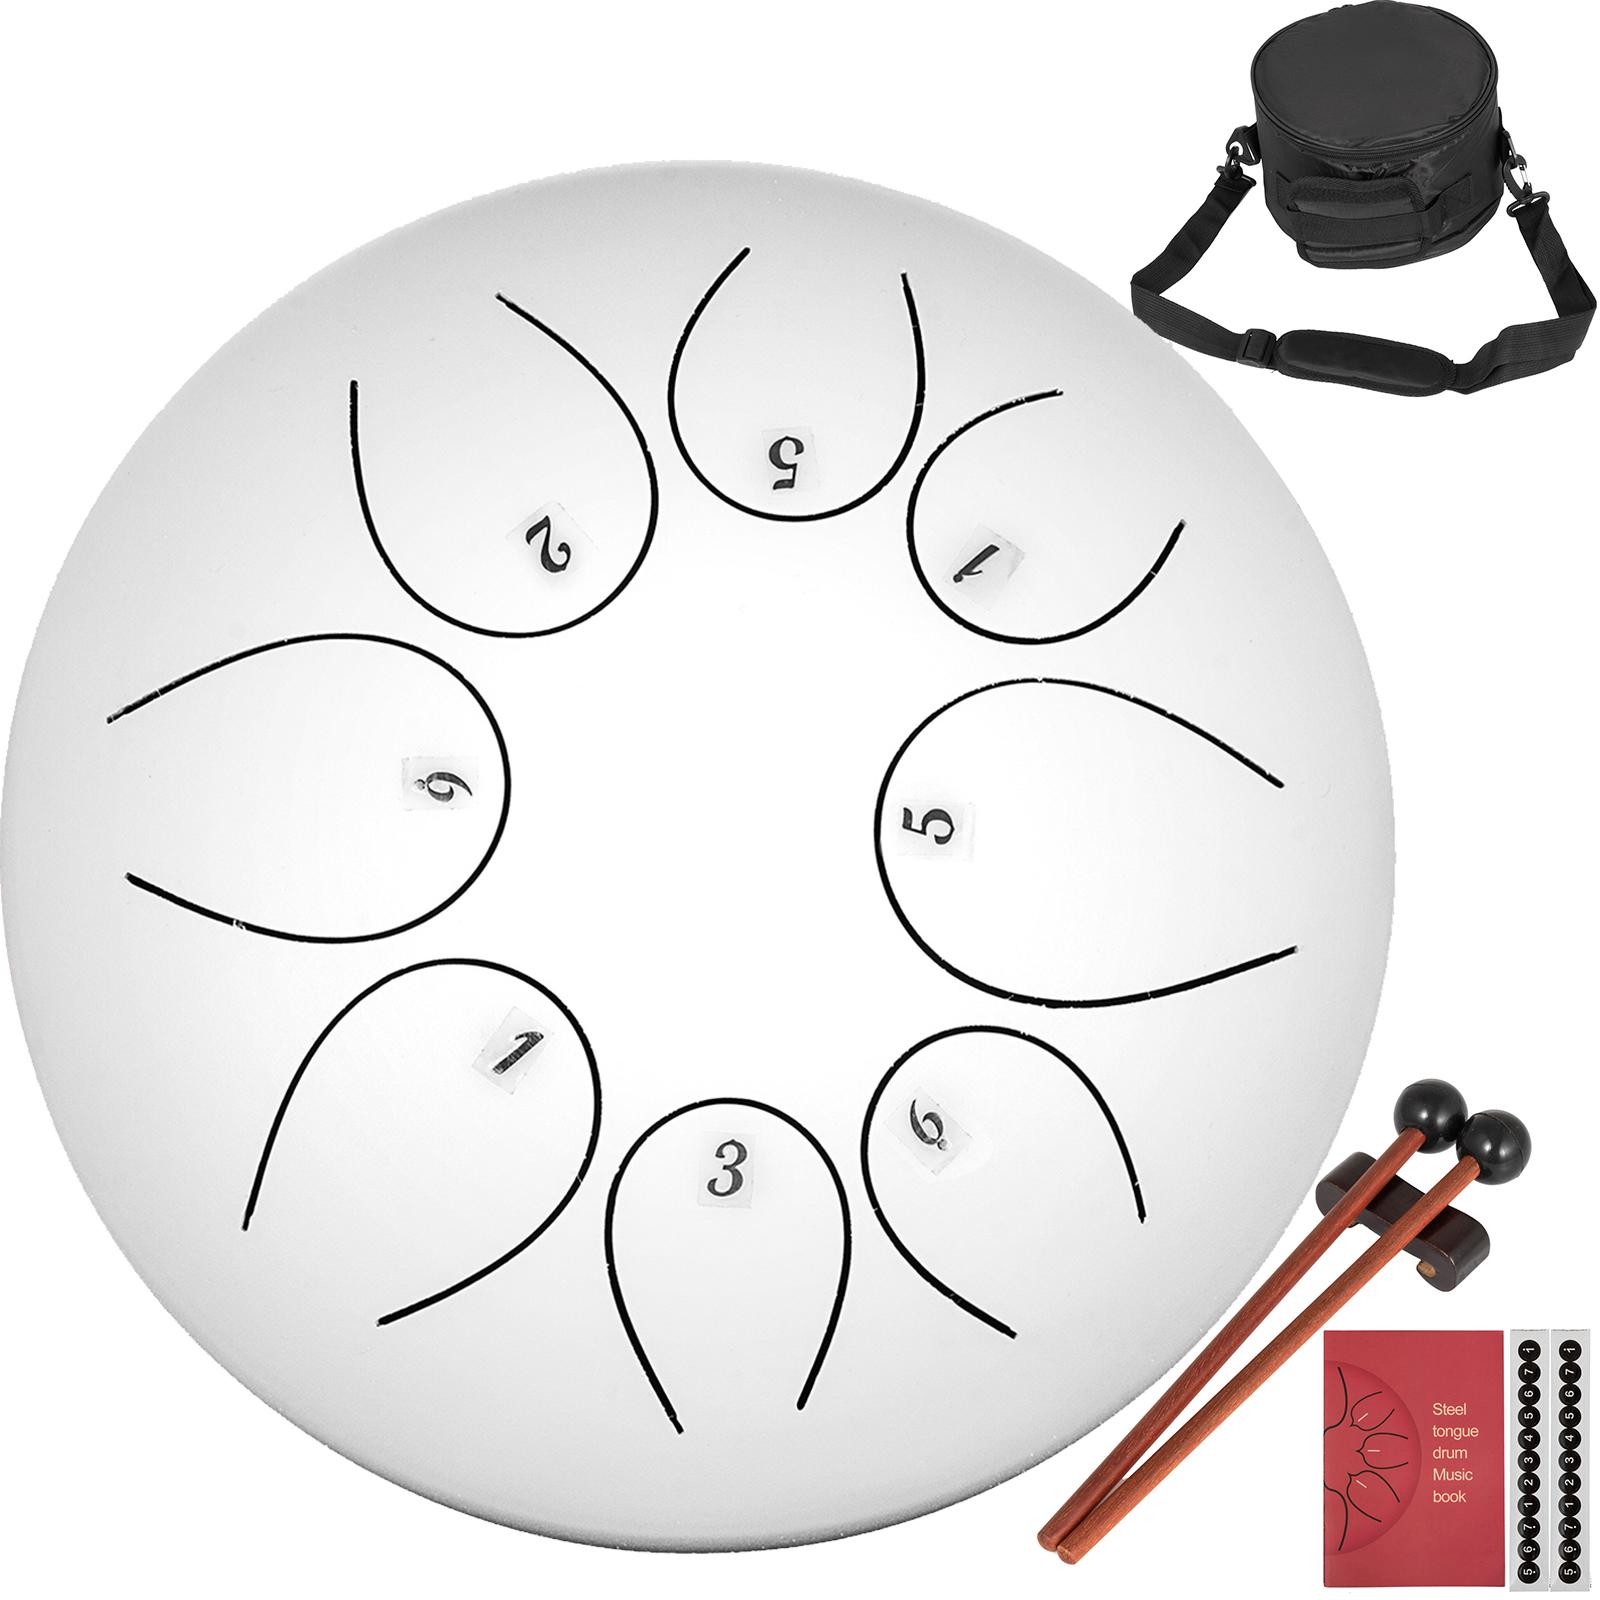 Steel Tongue Drum 8 Notes 10 inches Percussion Instrument with Bag, Book, Mallets от Vevor Many GEOs